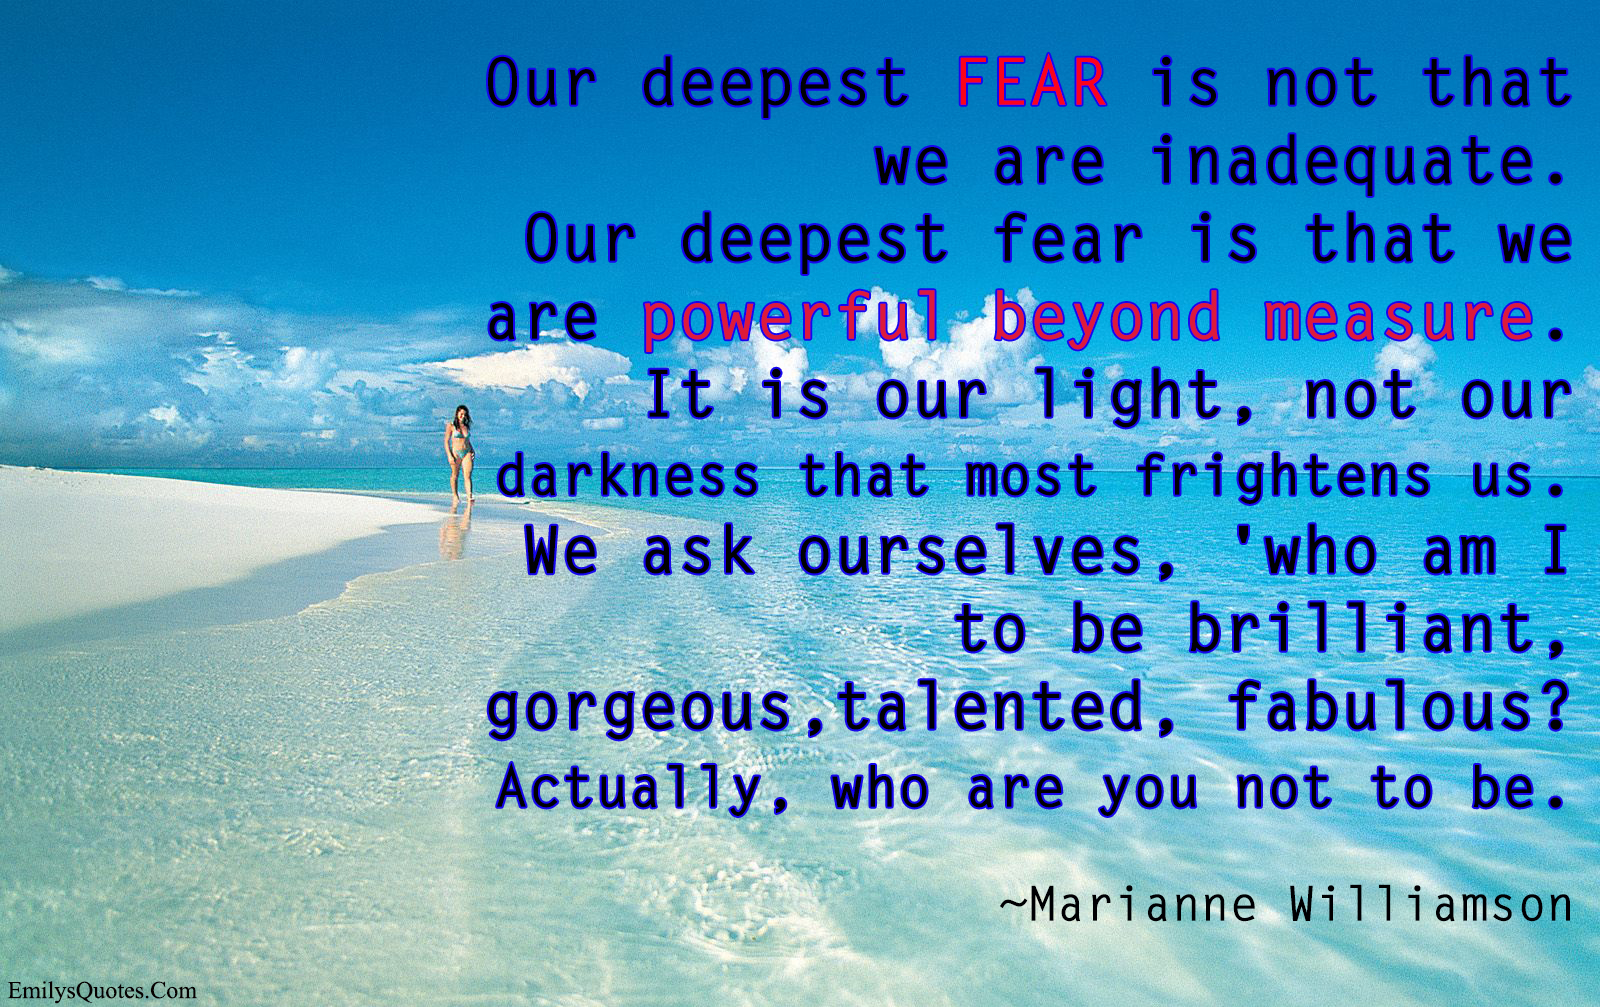 Our deepest fear is not that we are inadequate. Our deepest fear is that we are powerful